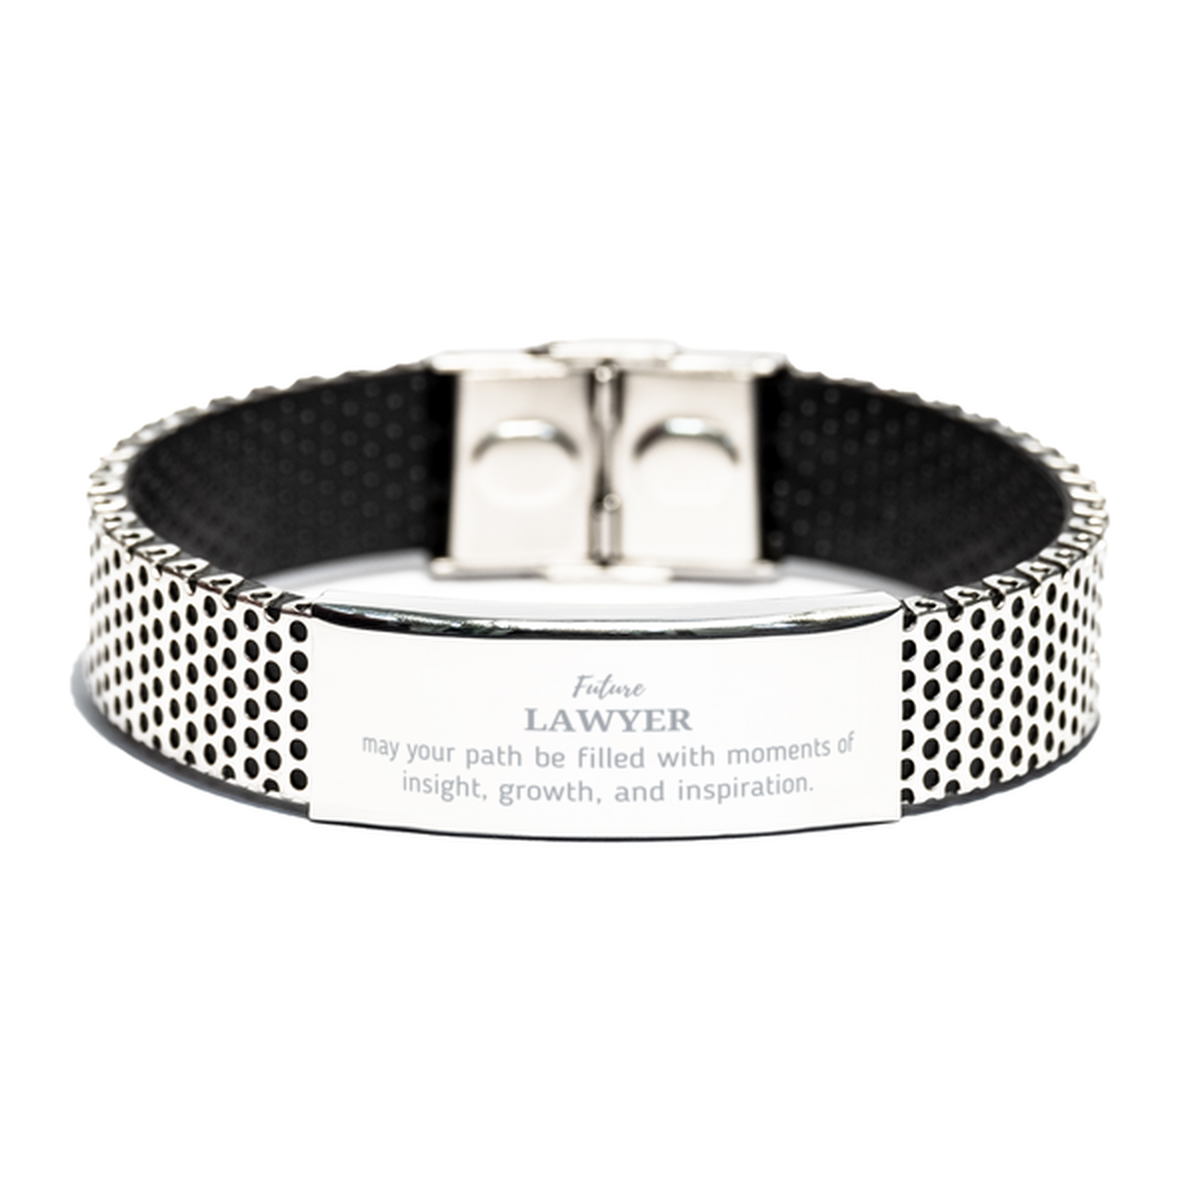 Future Lawyer Gifts, May your path be filled with moments of insight, Graduation Gifts for New Lawyer, Christmas Unique Stainless Steel Bracelet For Men, Women, Friends